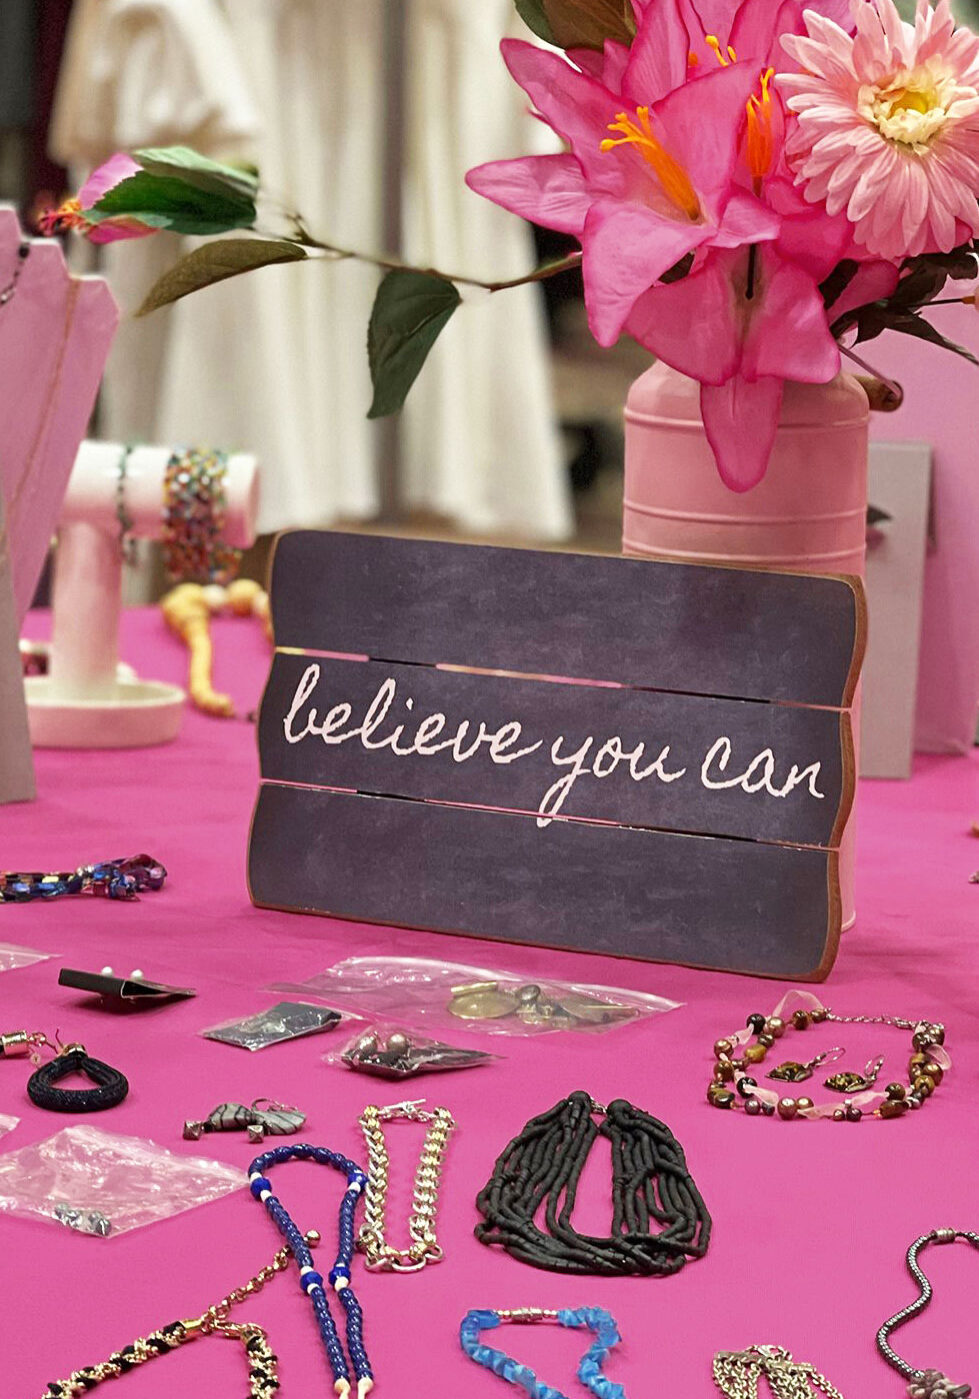 Believe You Can mantra table decoration